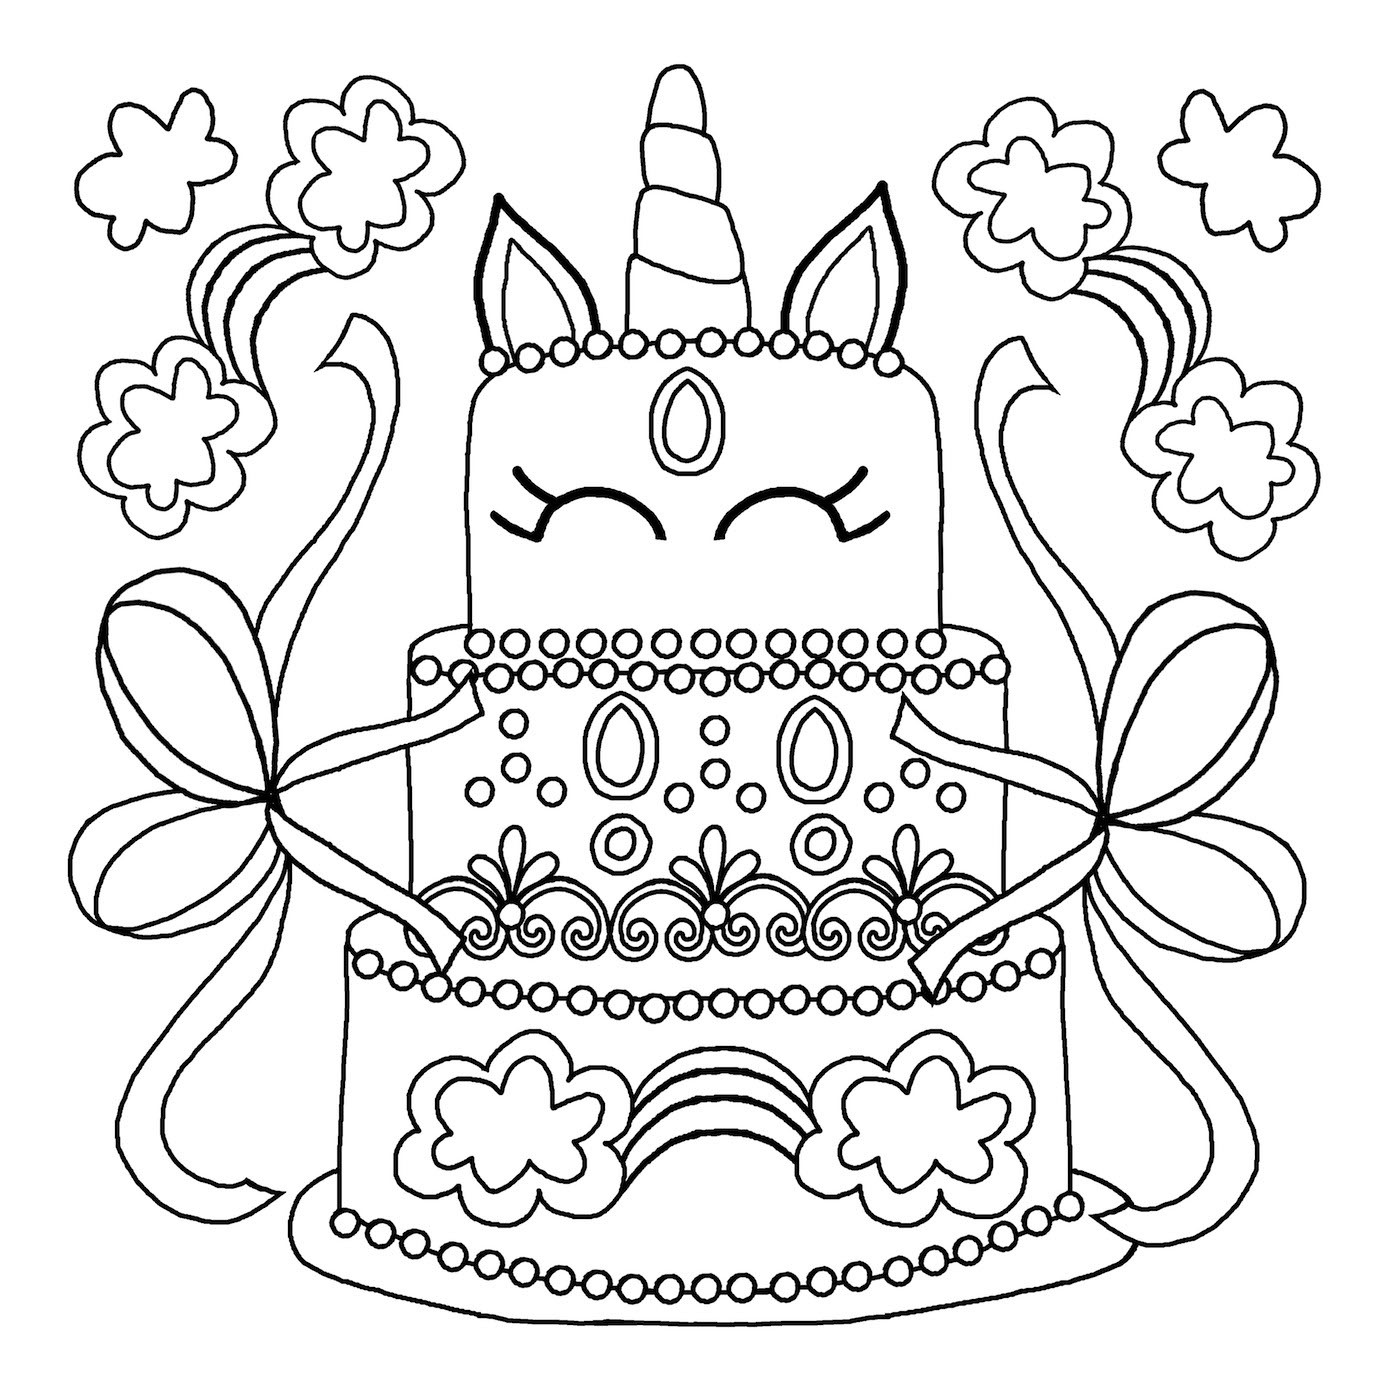 Coloring Pages For Kids Unicorn
 unicorn colouring book pages 3 Michael O Mara Books